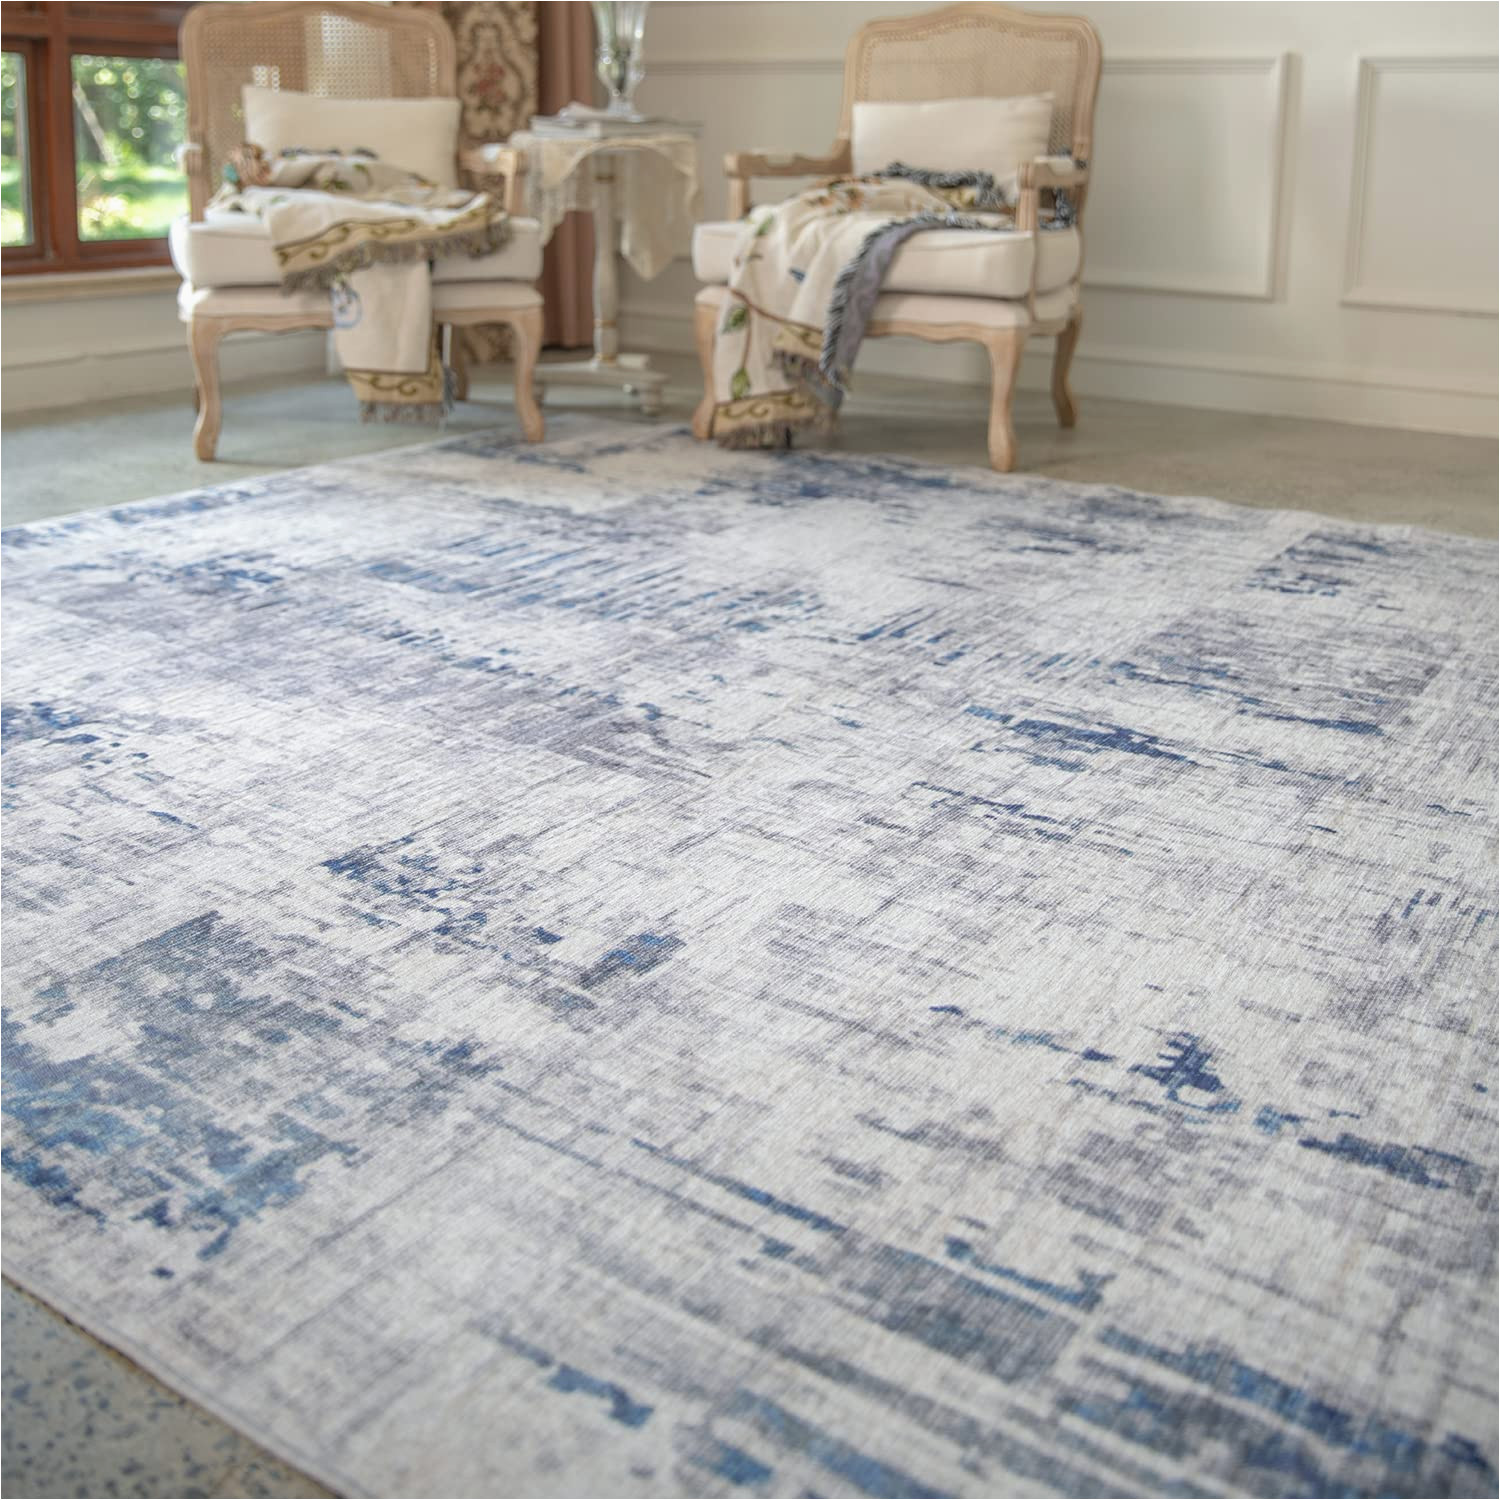 Home Goods area Rugs 8 X 10 Resare Modern Abstract area Rugs 8×10 Distressed Rug Machine Washable, Ideal Home Decor, Navy